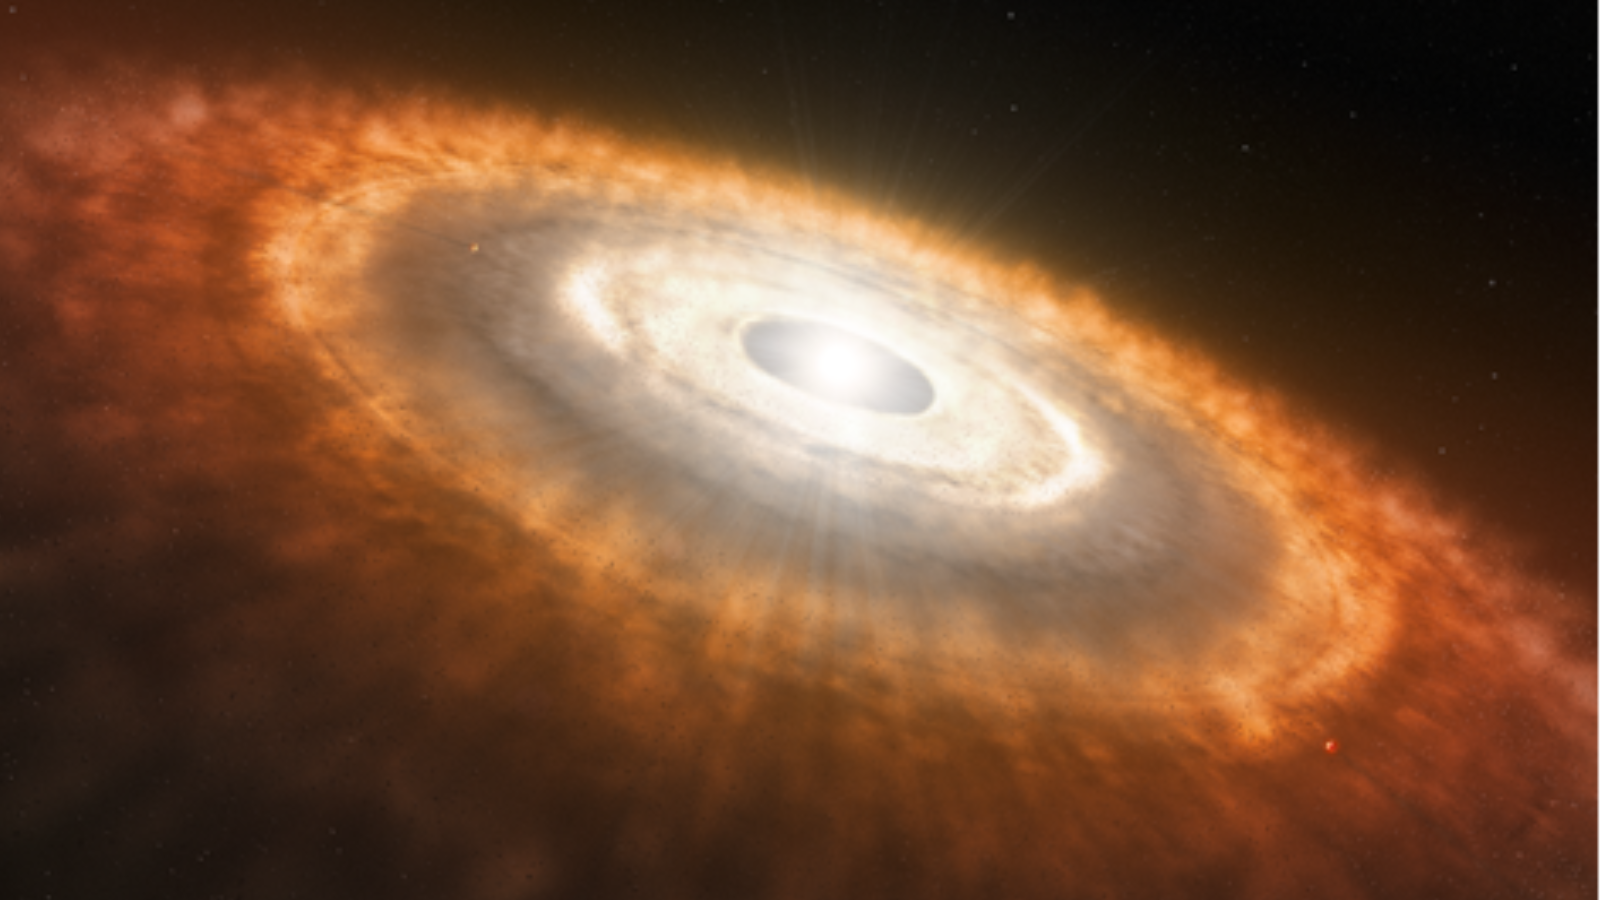 An illustration of a bright white star surrounded by a huge halo of reddish gas and dust and other stuff.